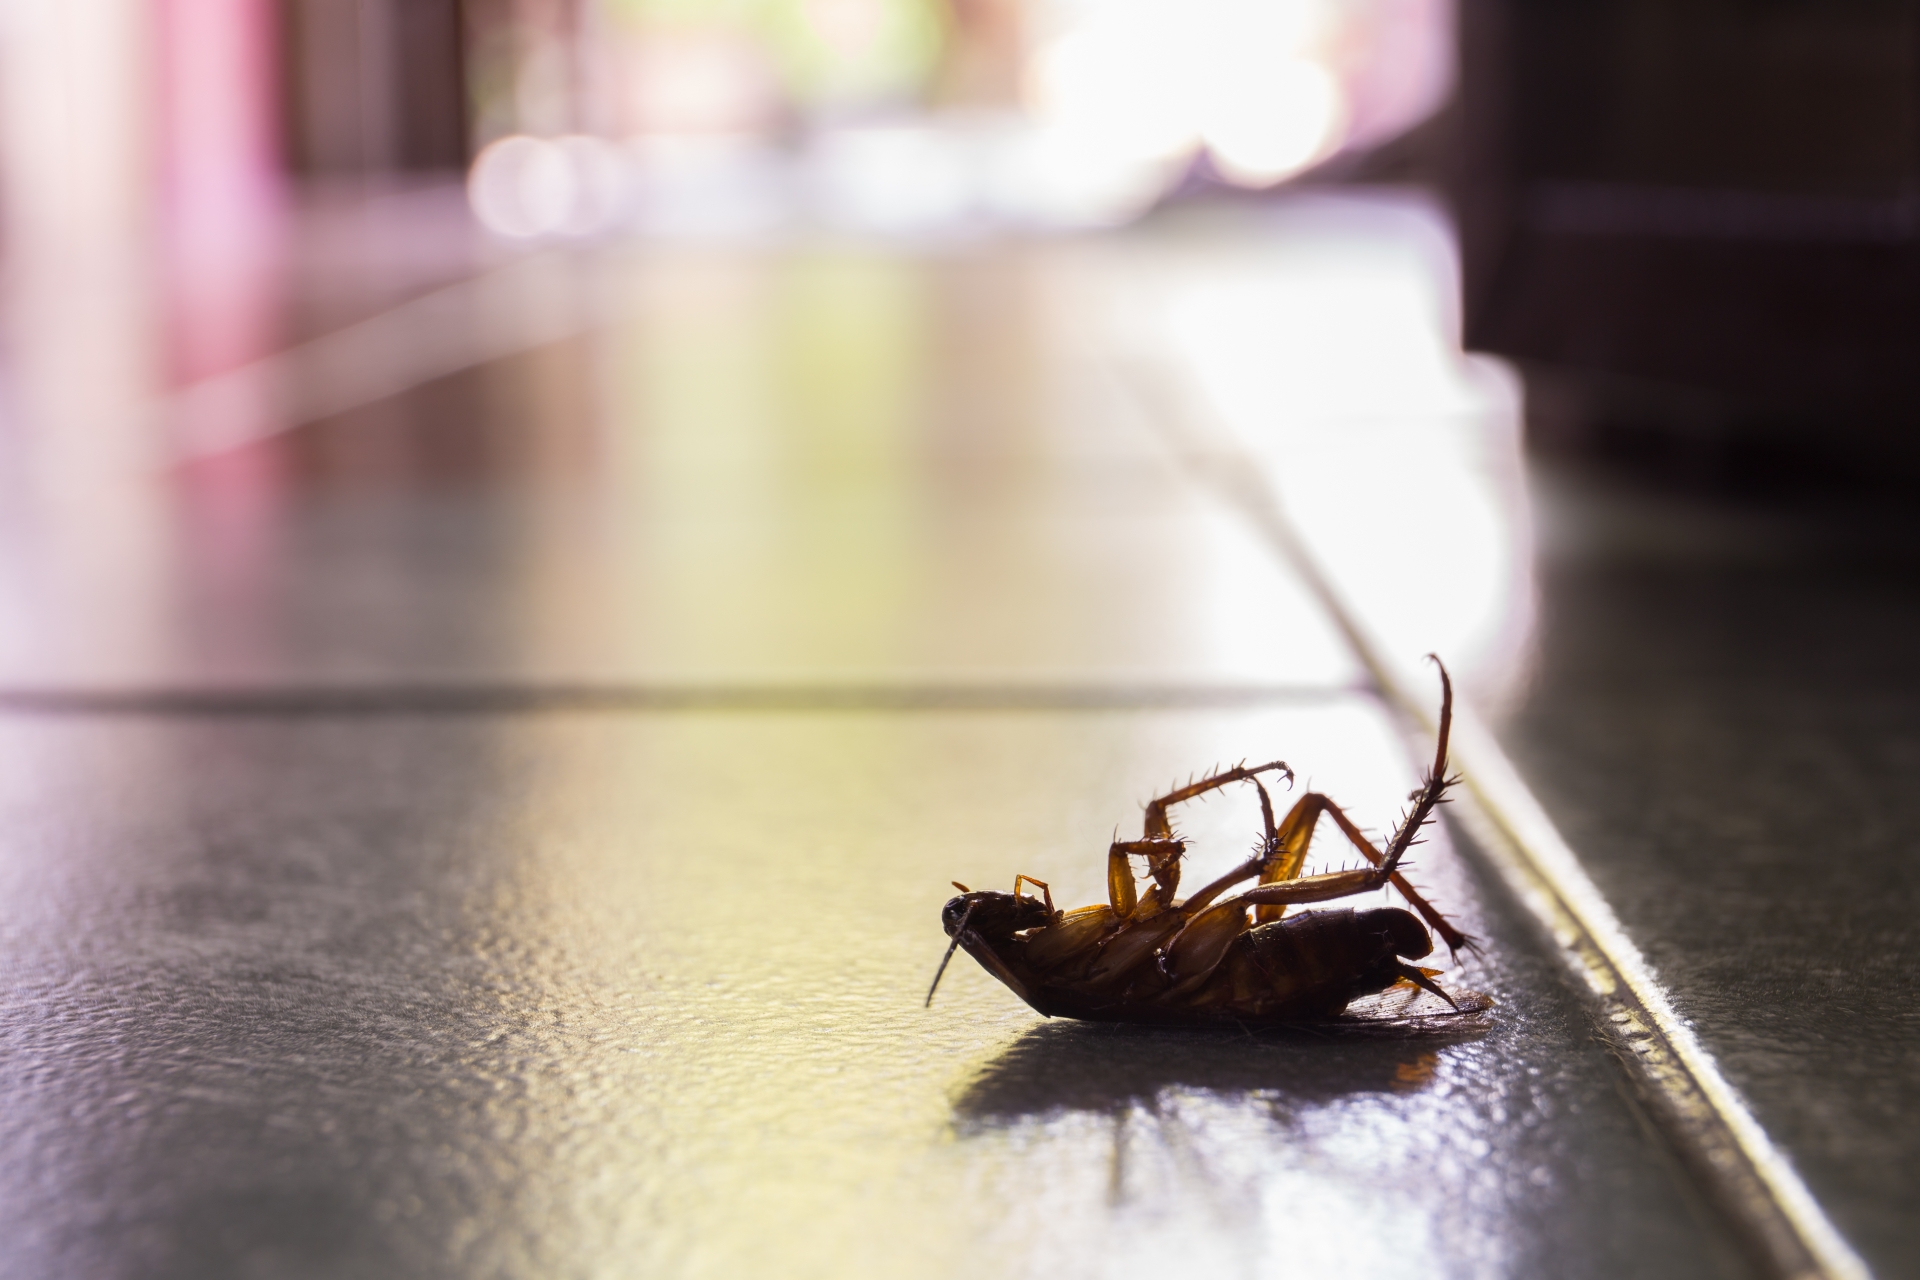 Cockroach Control, Pest Control in Kensal Green, NW10. Call Now 020 8166 9746